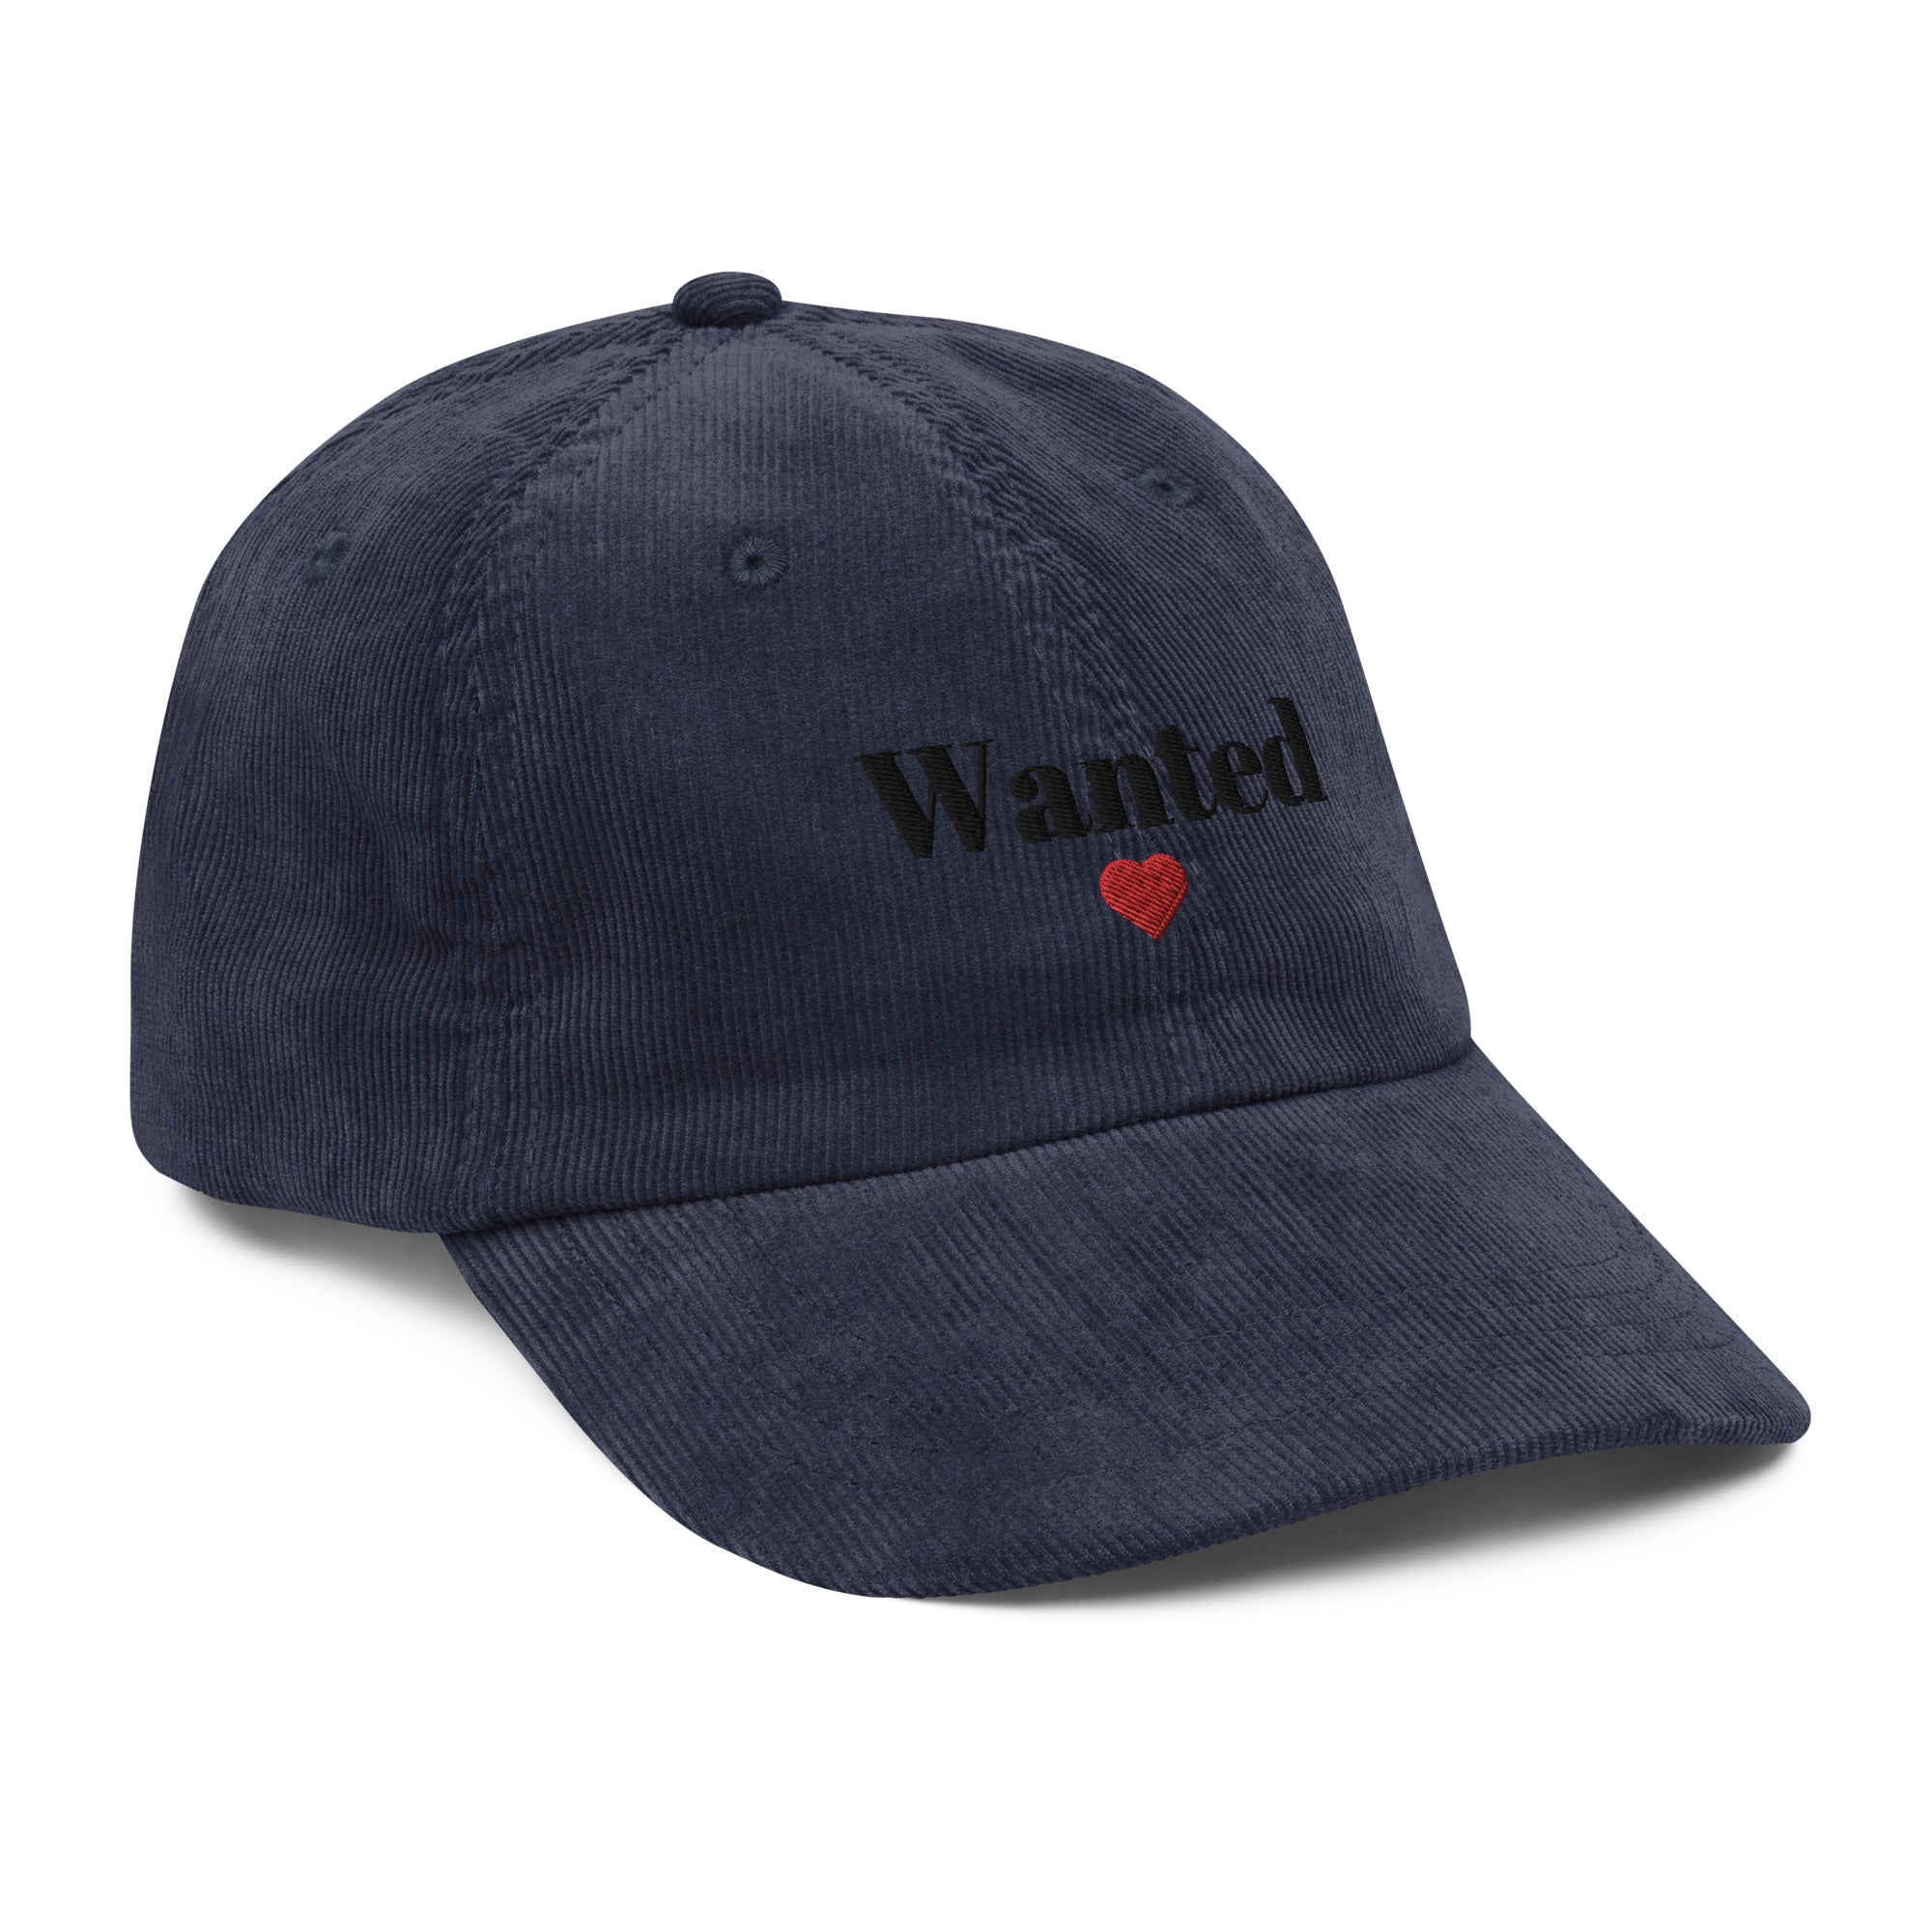 Wanted Hat